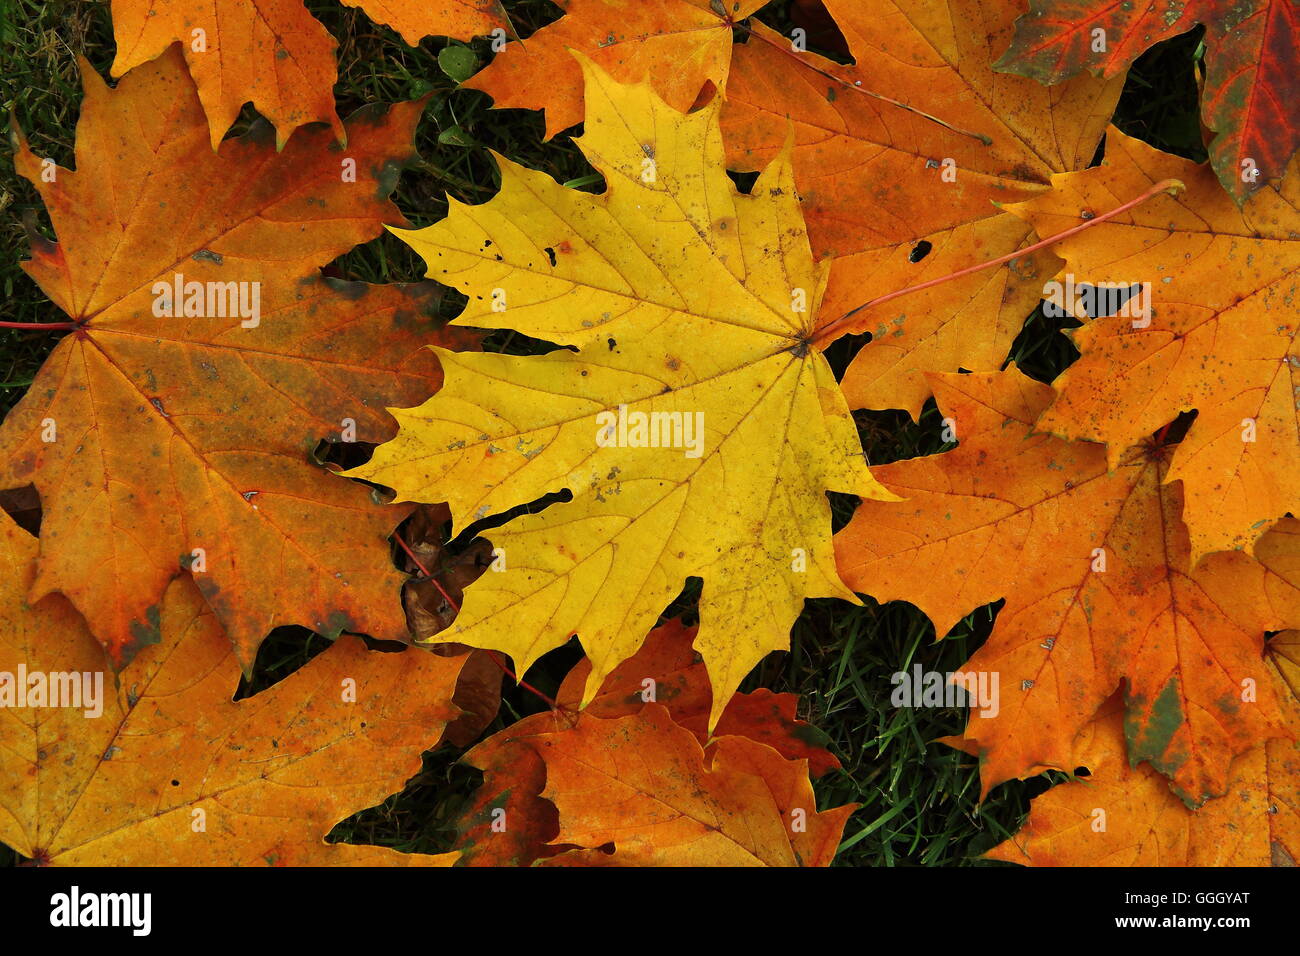 Autumn Leaves, Colorful leaves, Norway maple, / Buntes Herbstlaub des Spitz-Ahorn (Acer platanoides), Fall Leaves, Fall Foliage Stock Photo